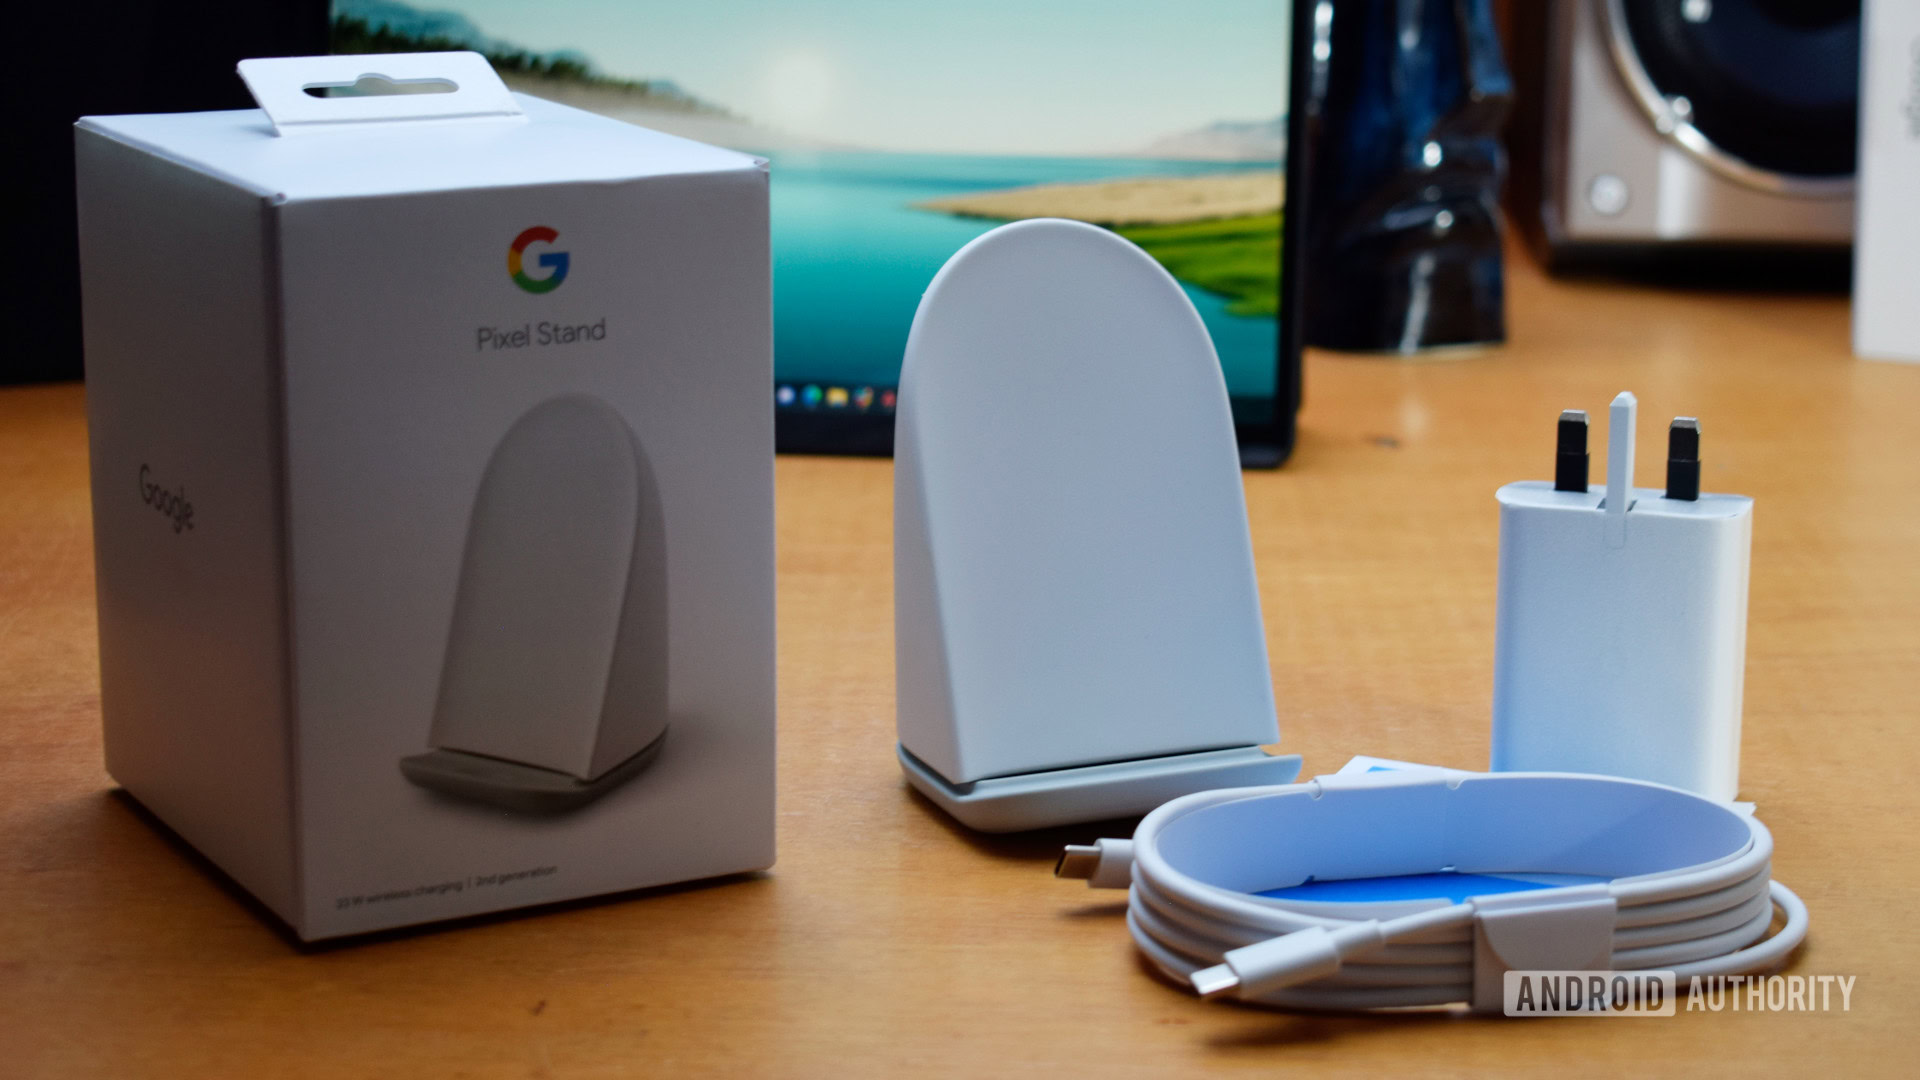 Pixel Stand 2nd Gen: Unboxing and first impressions [Video]